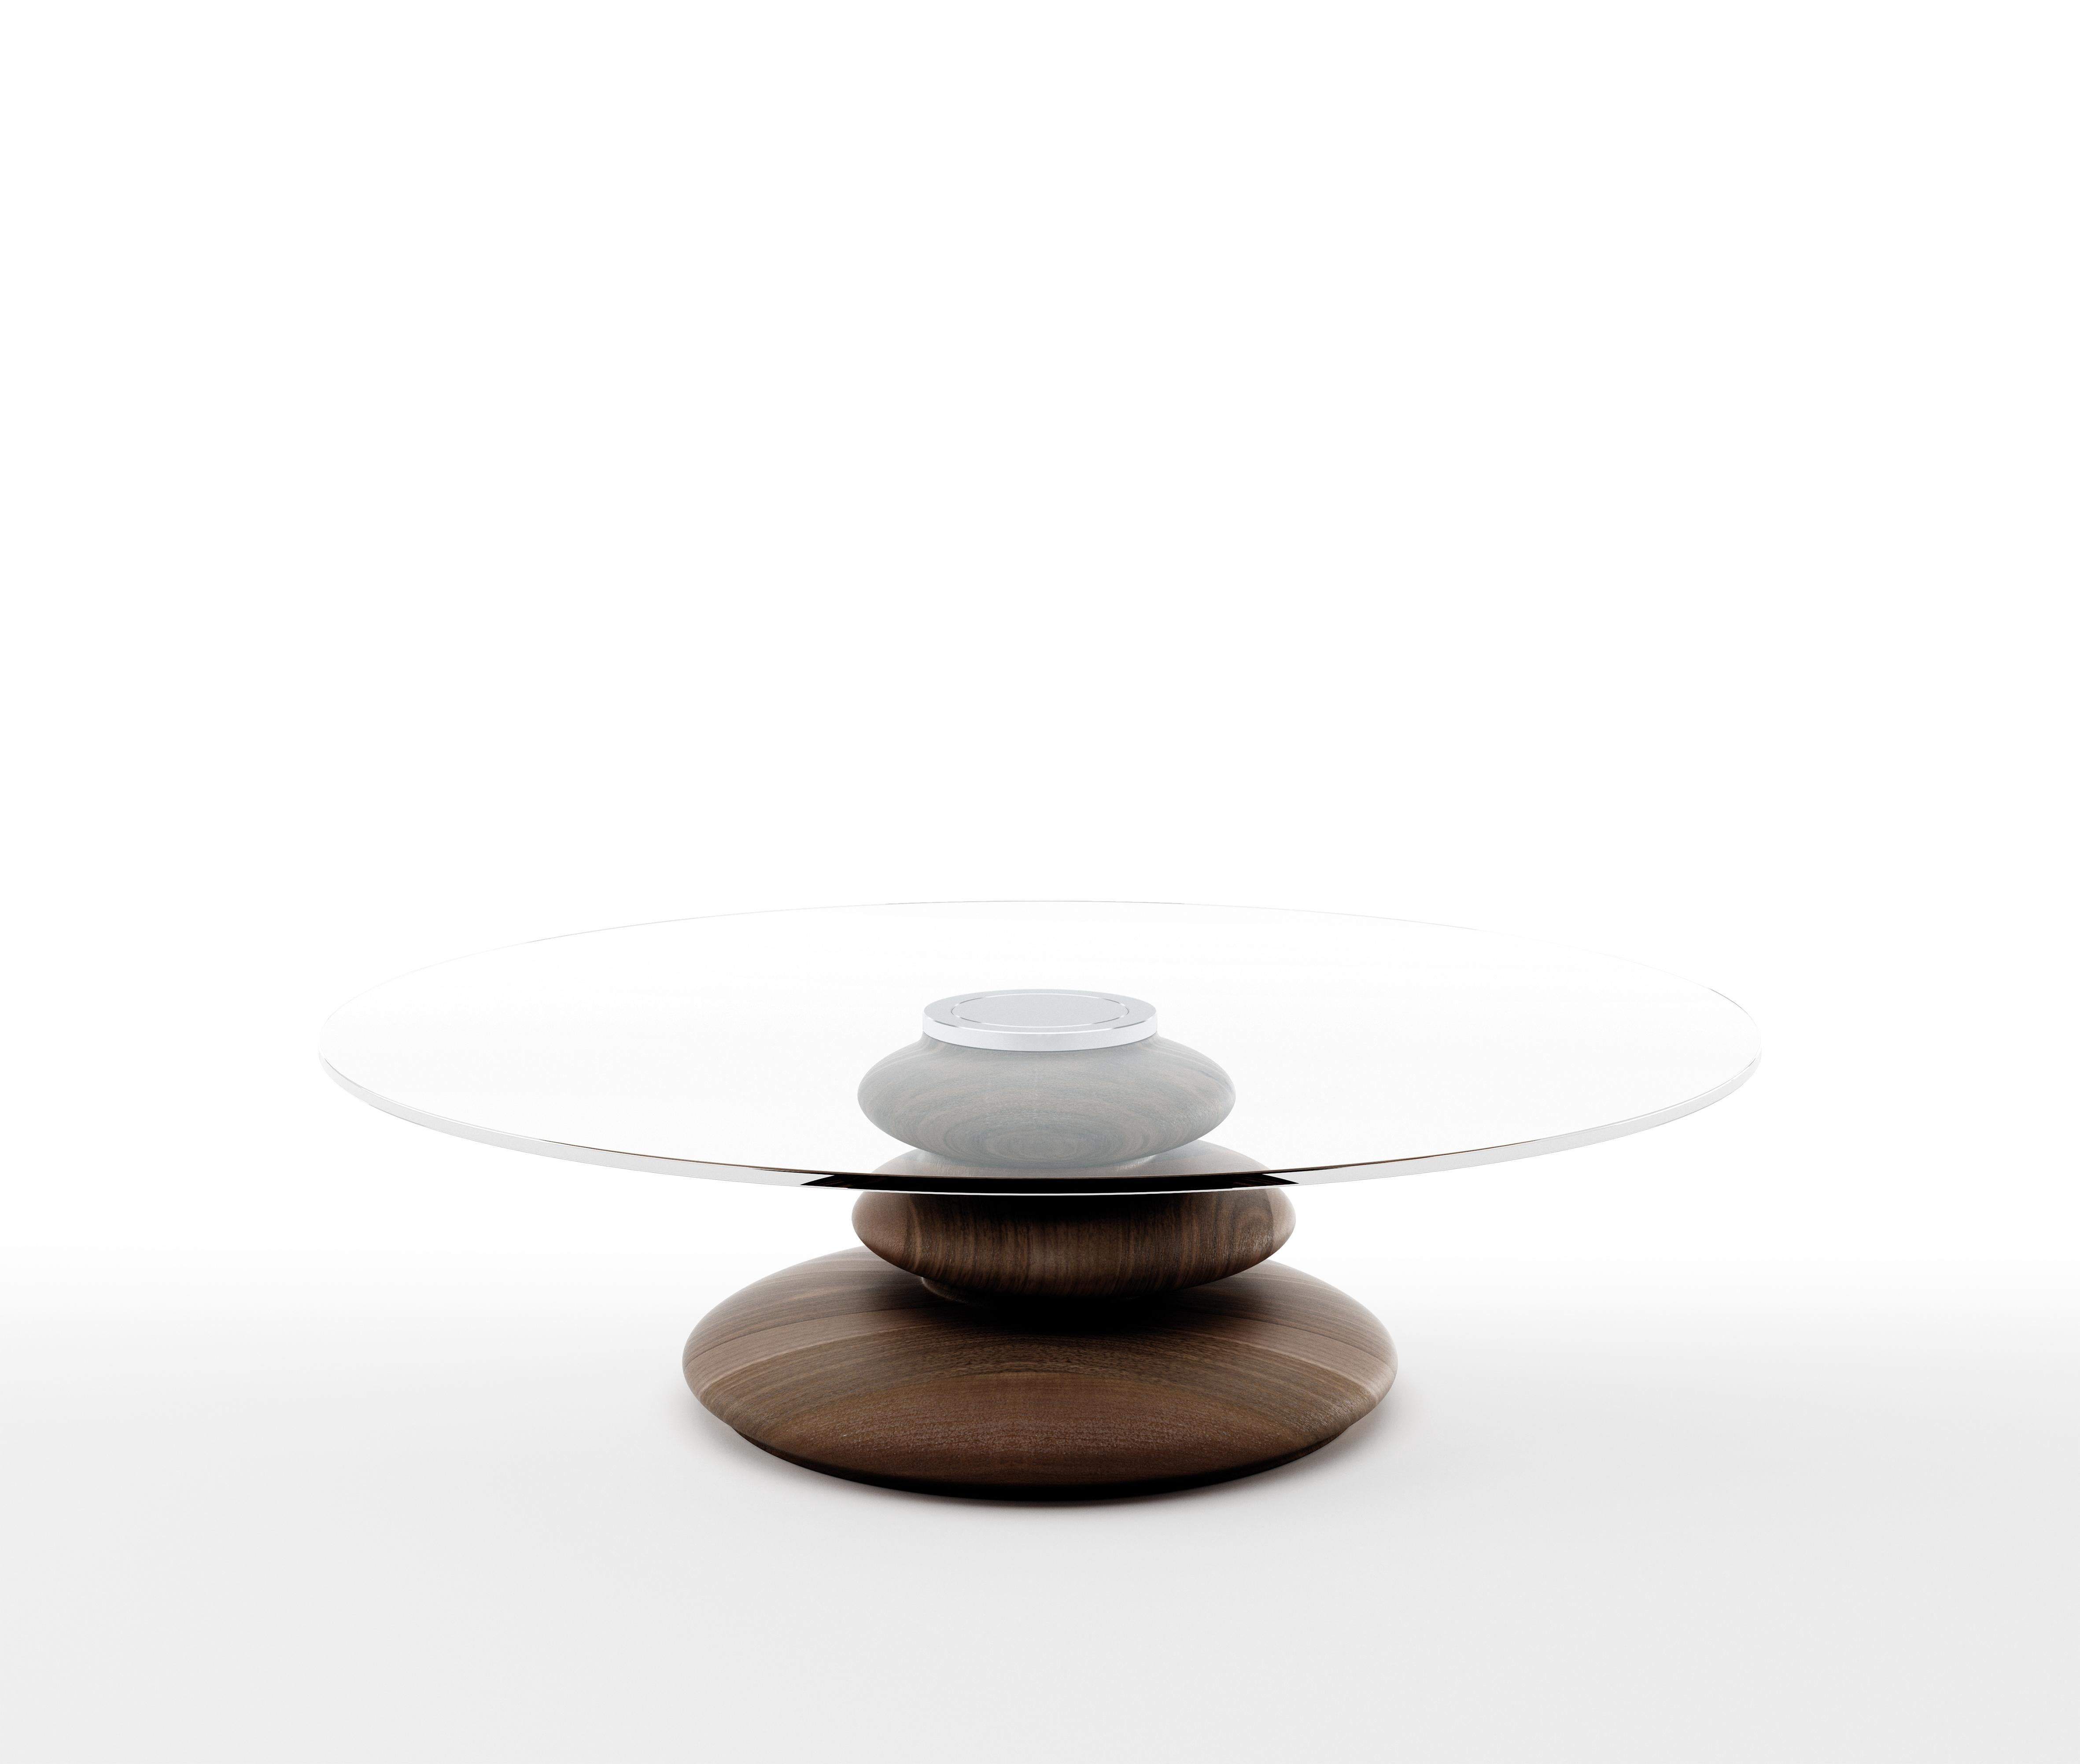 Ometto modern Italian coffee table with Canaletto walnut solidwood base and round crystal glass top
Measure: Diameter cm 120.


Please Note: 
- If the item is to be shipped to the USA, please contact the seller to require custom features as this